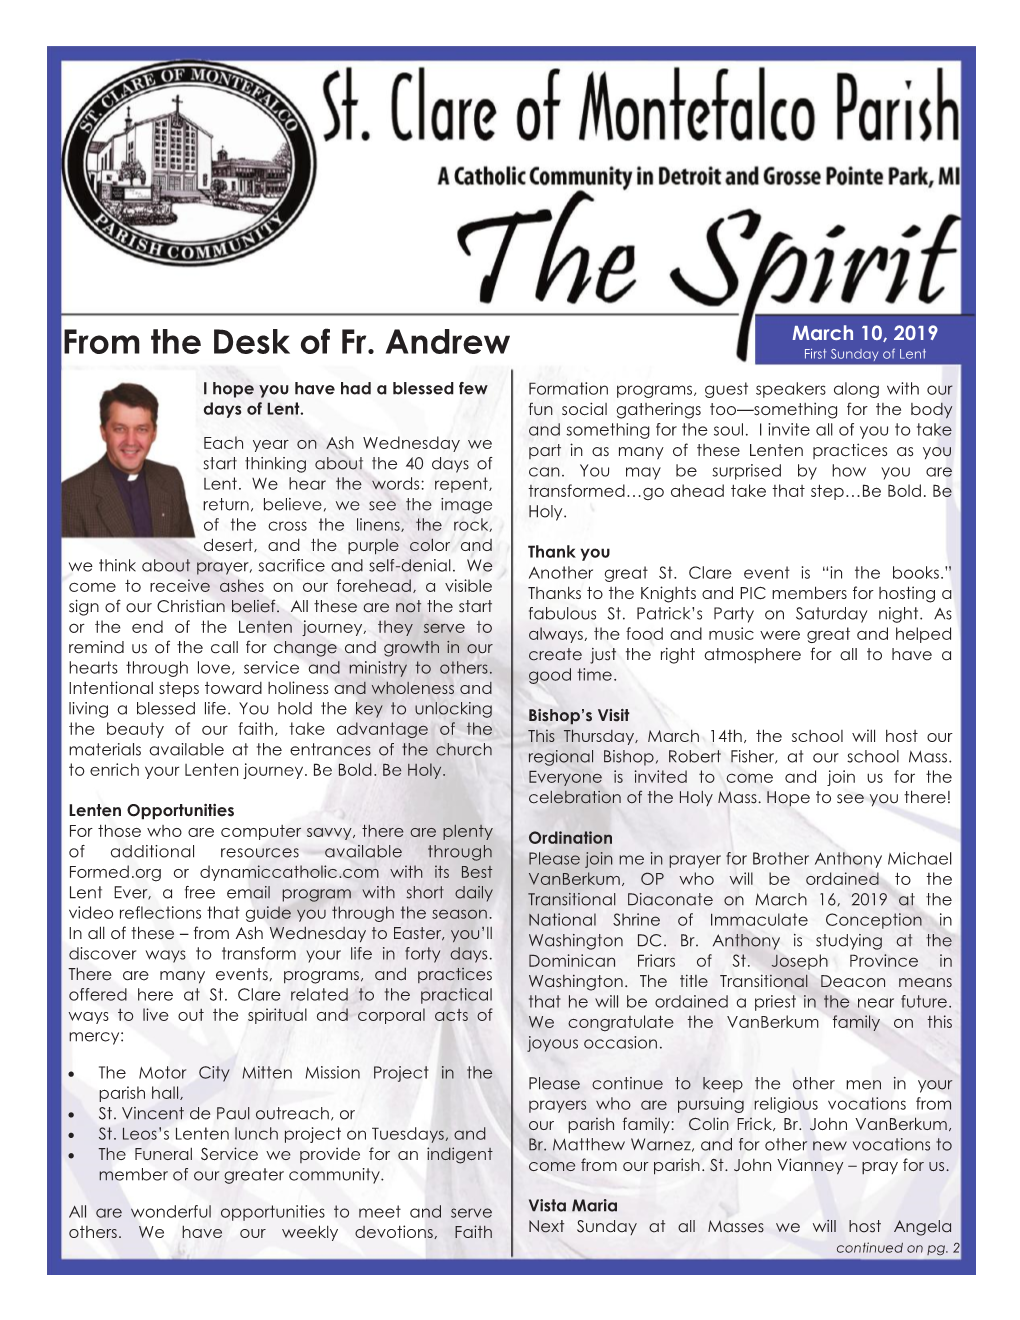 From the Desk of Fr. Andrew First Sunday of Lent